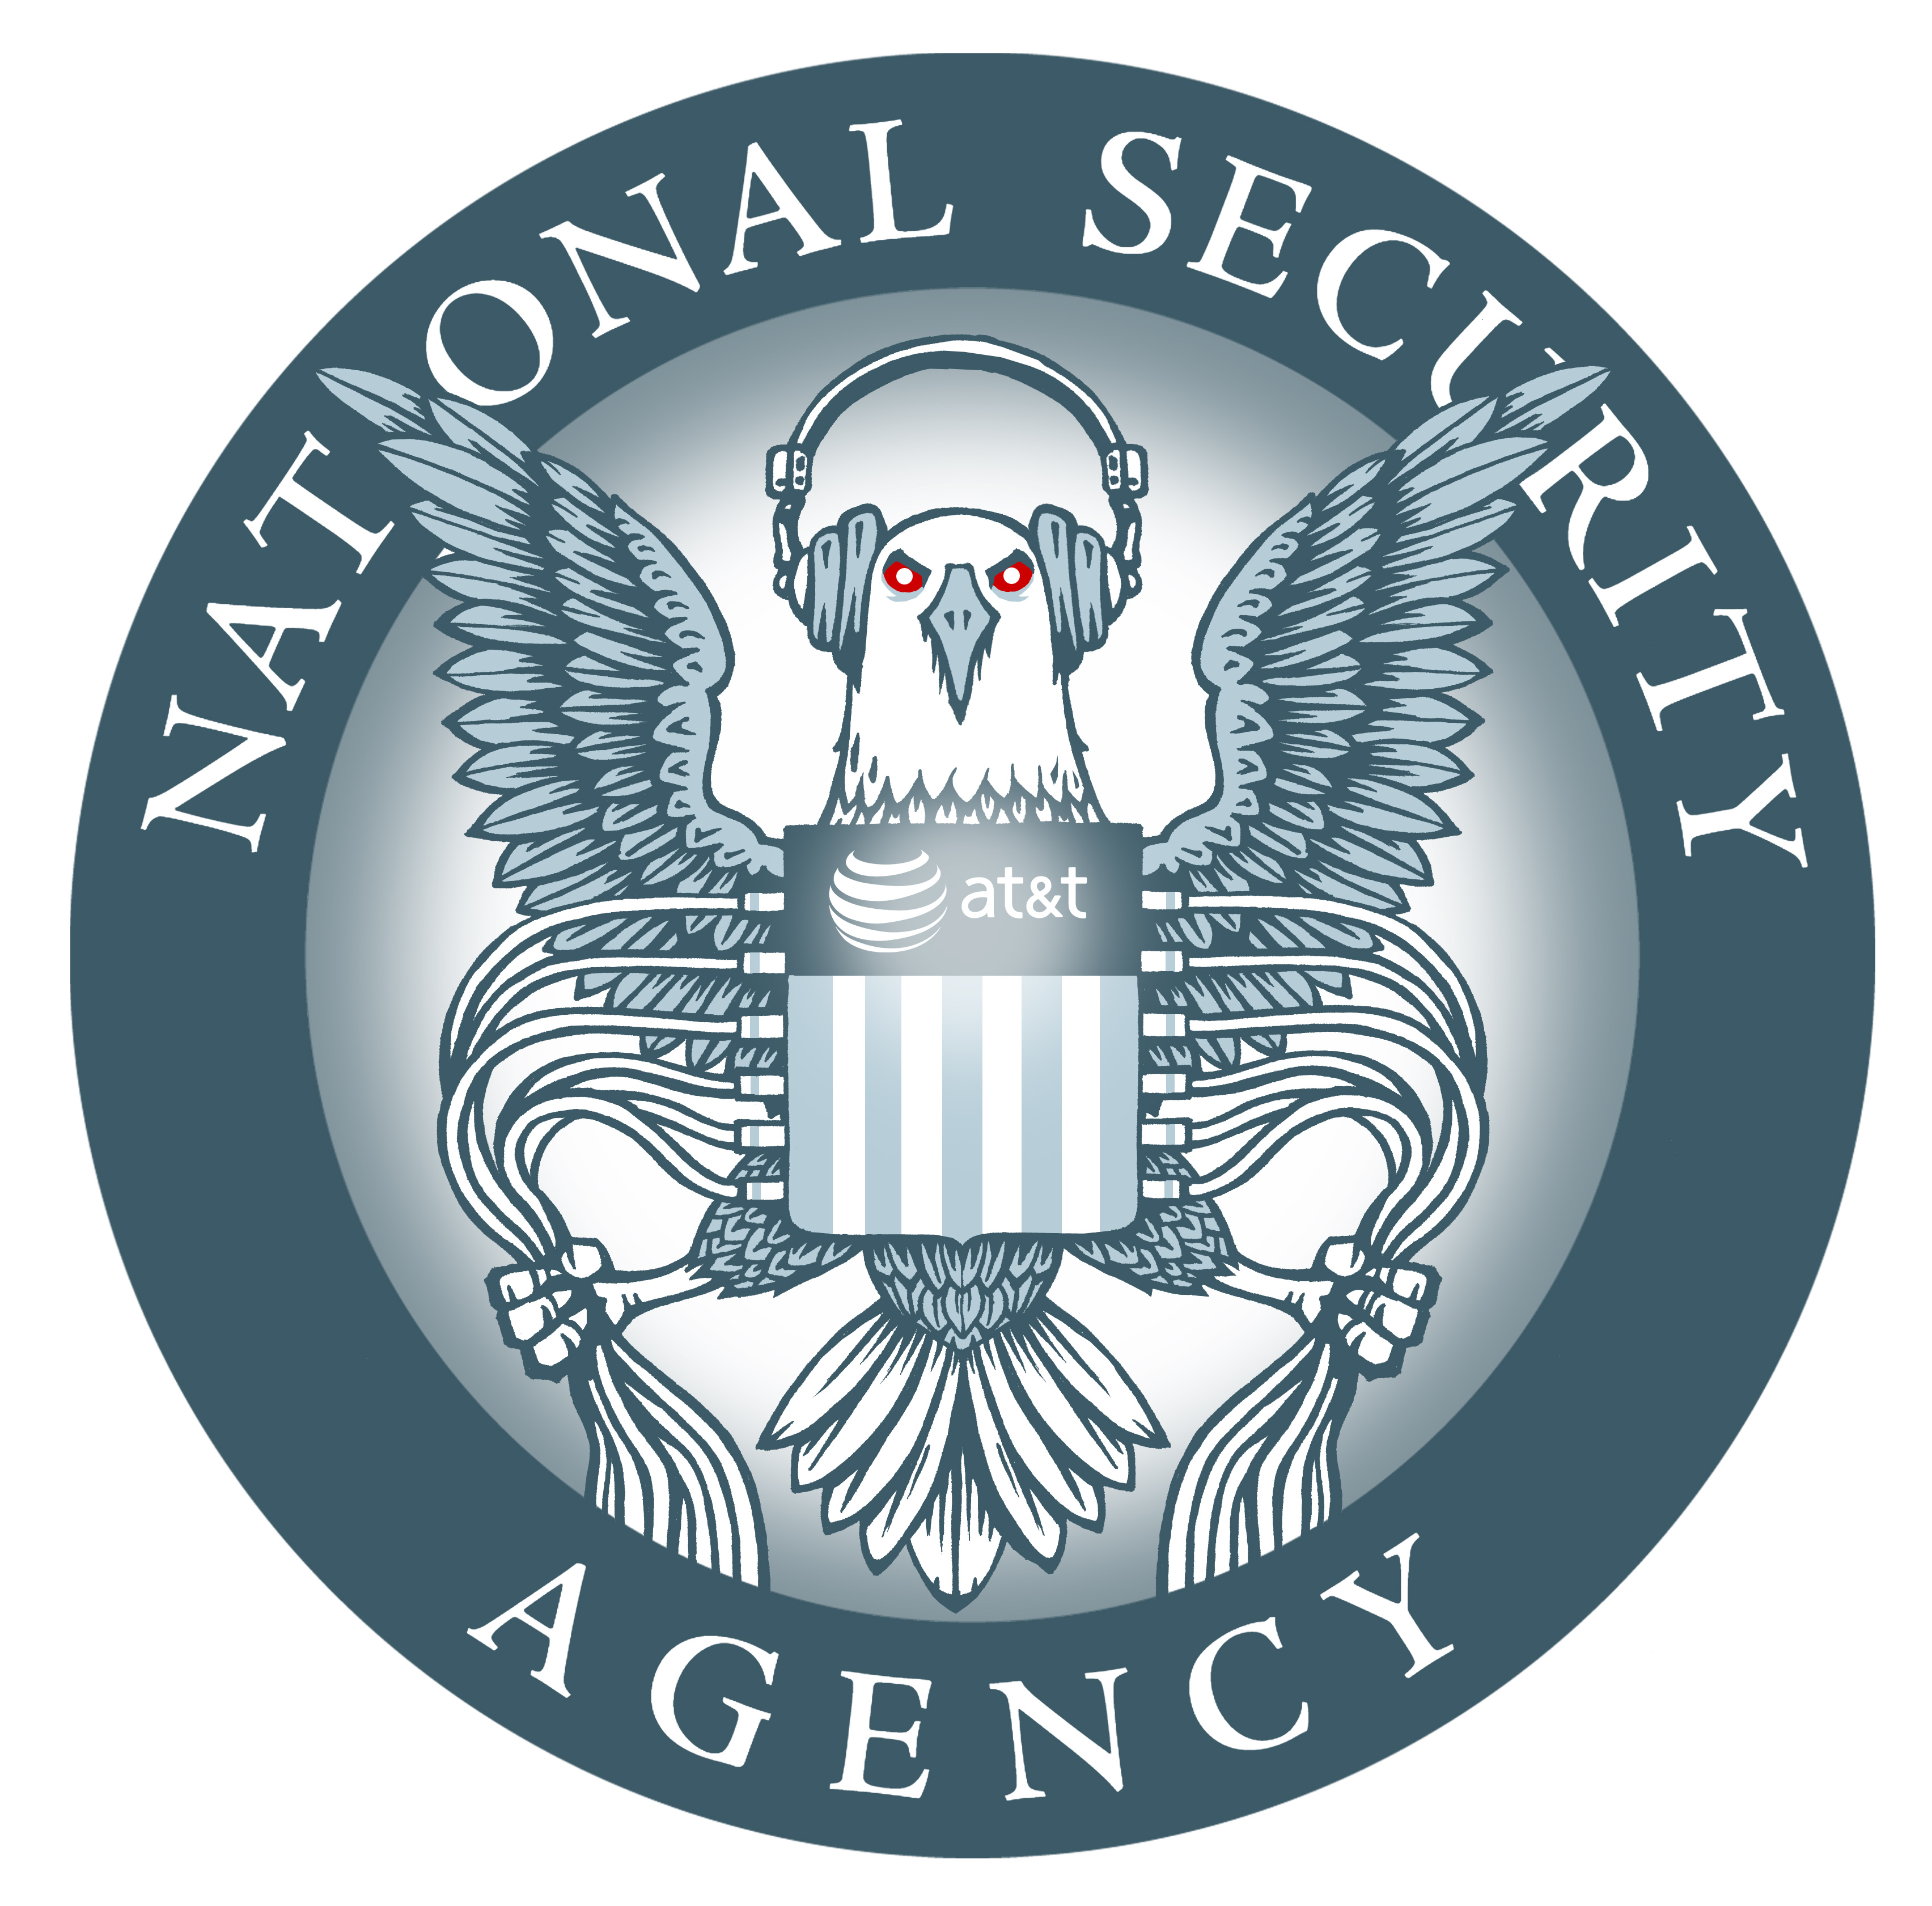 Nsa and your phone calls: the finest of ironies